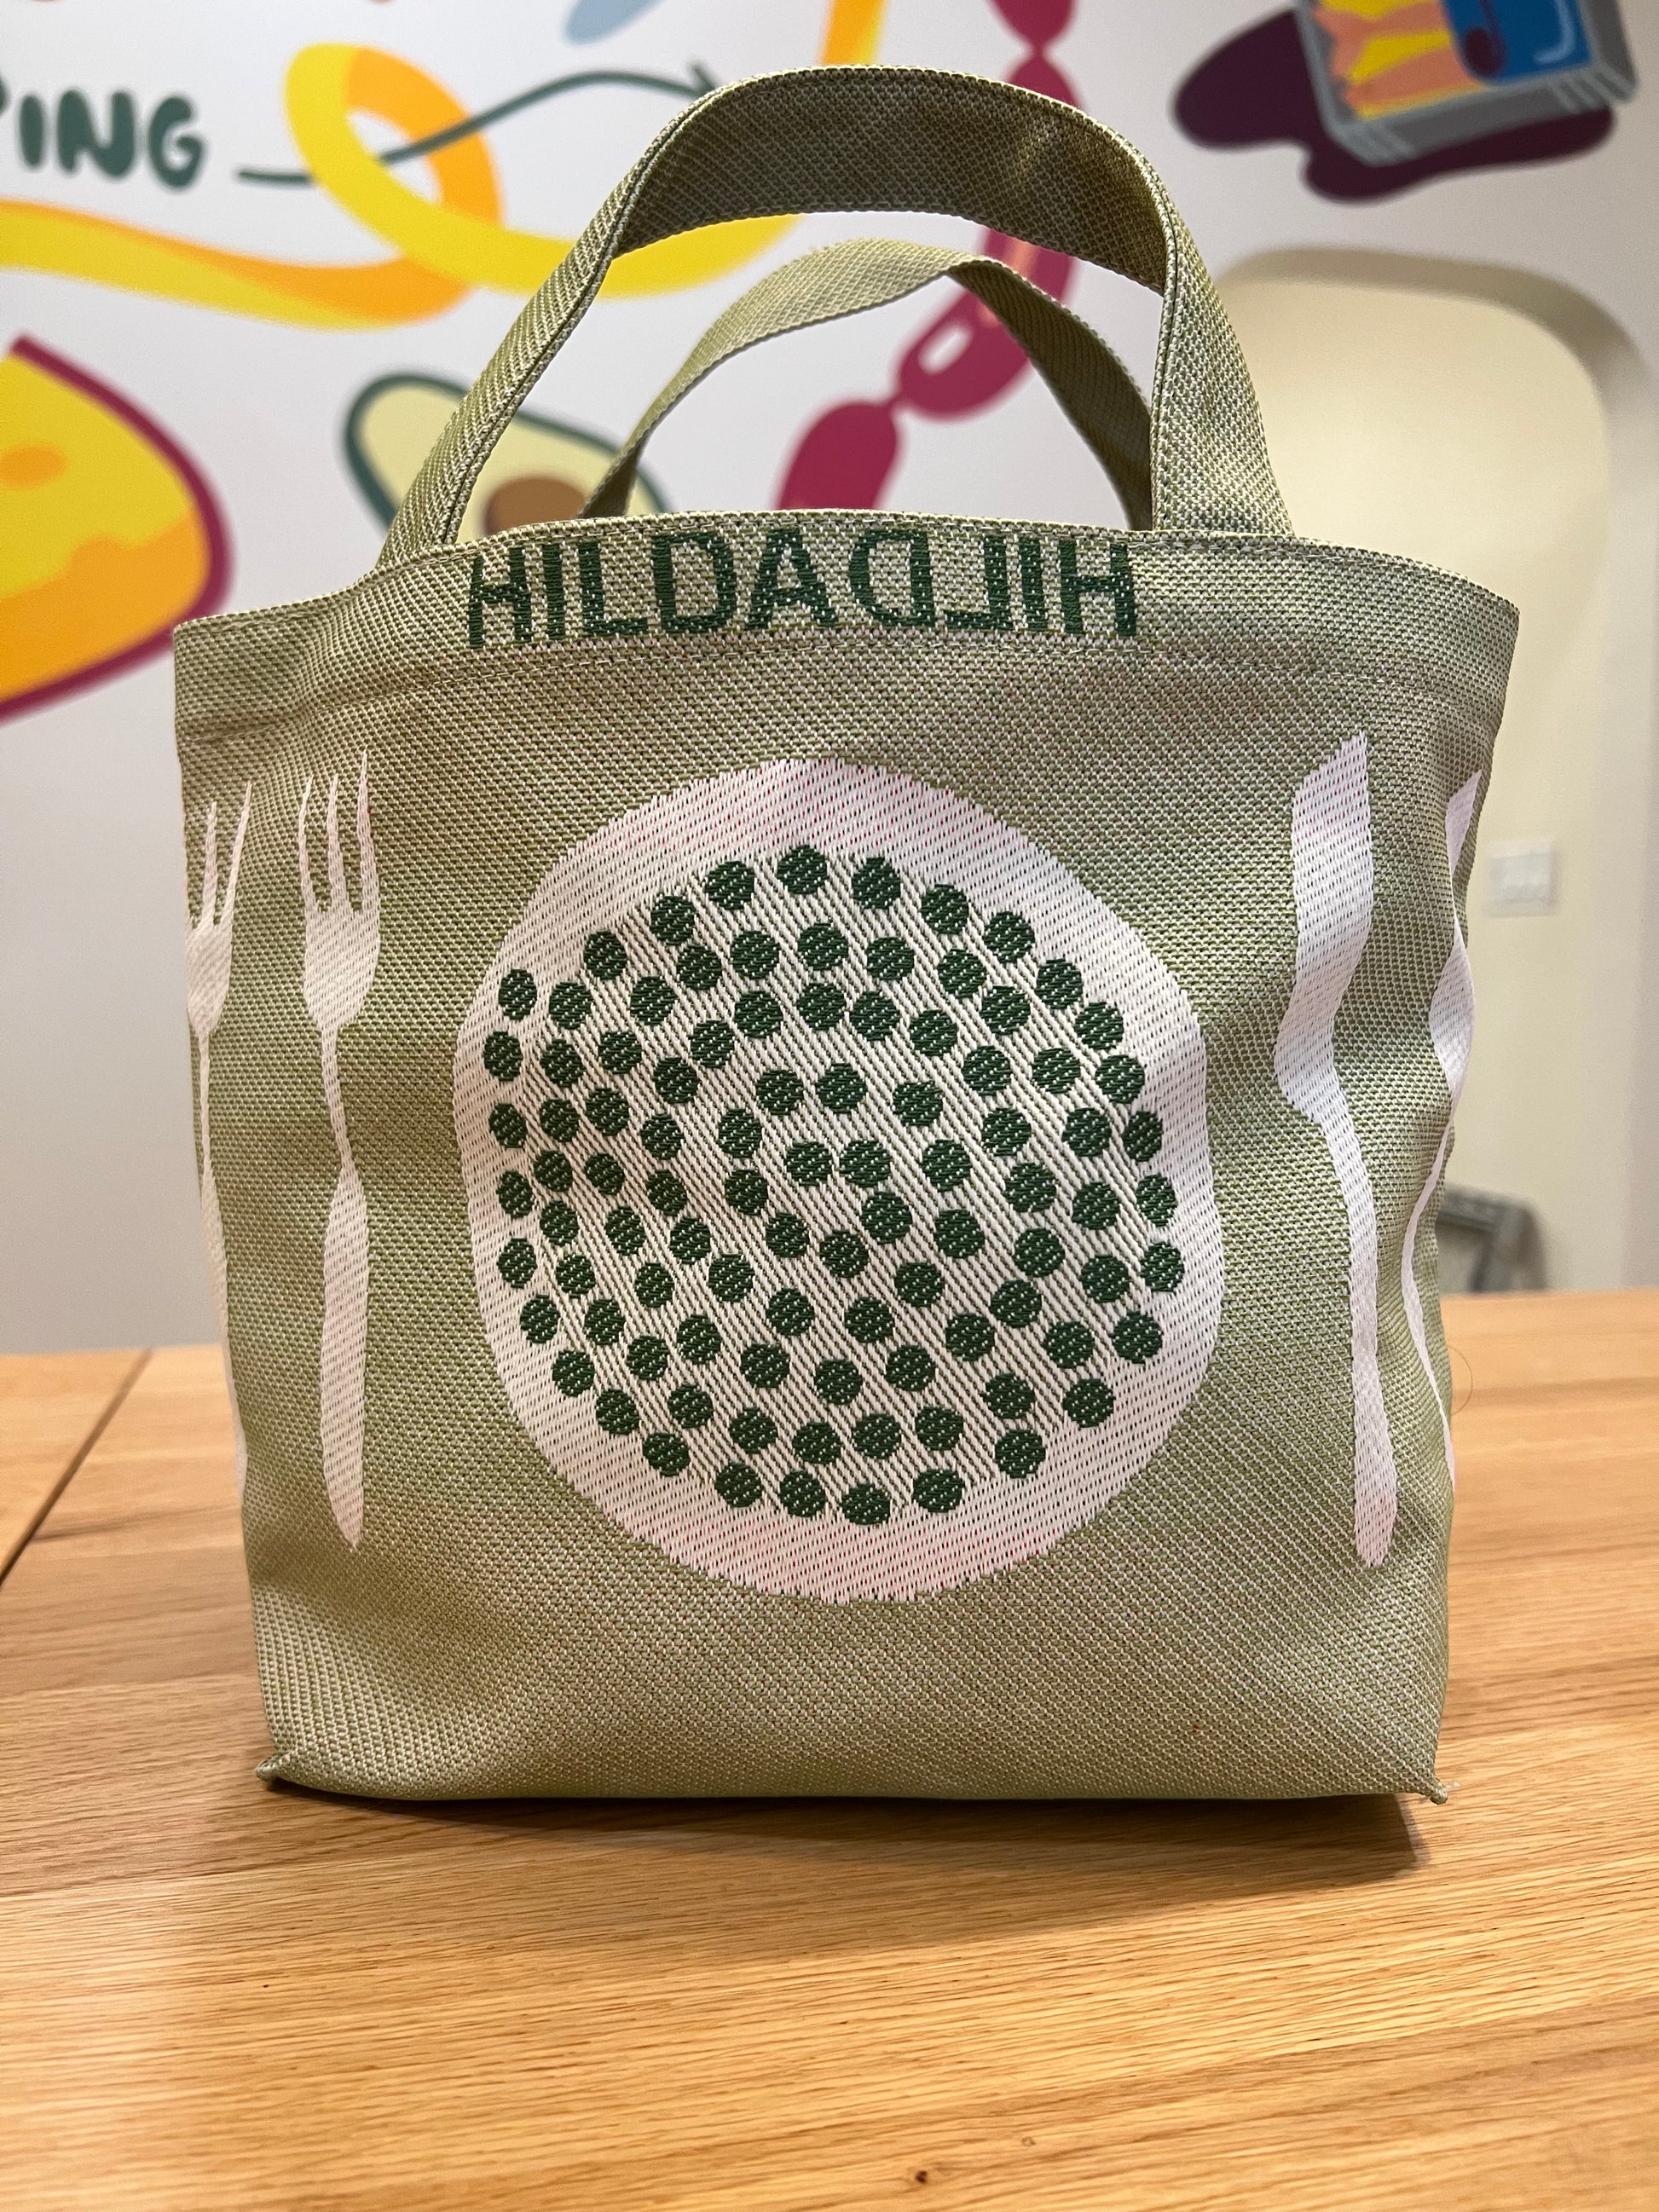 Hilda Hilda lunch bag showing the opposite side which has peas/beans on a plate with eating utensils.